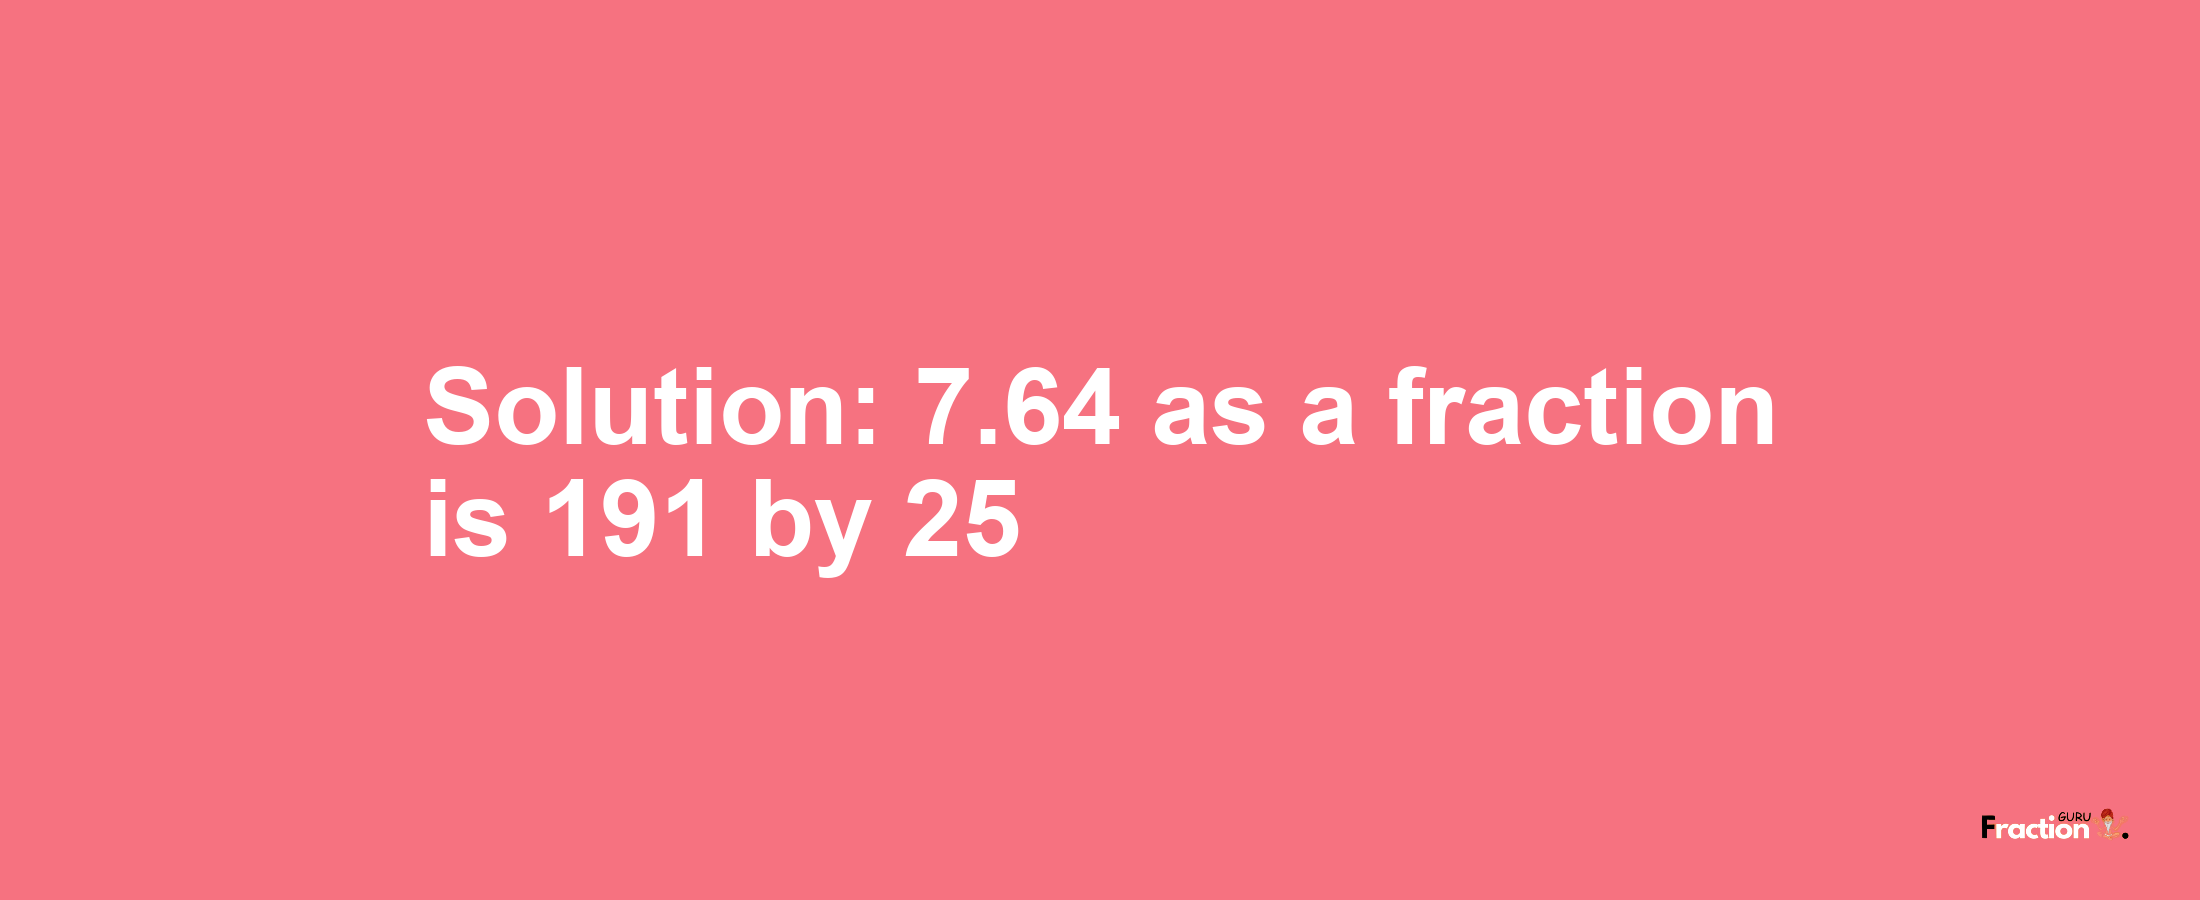 Solution:7.64 as a fraction is 191/25